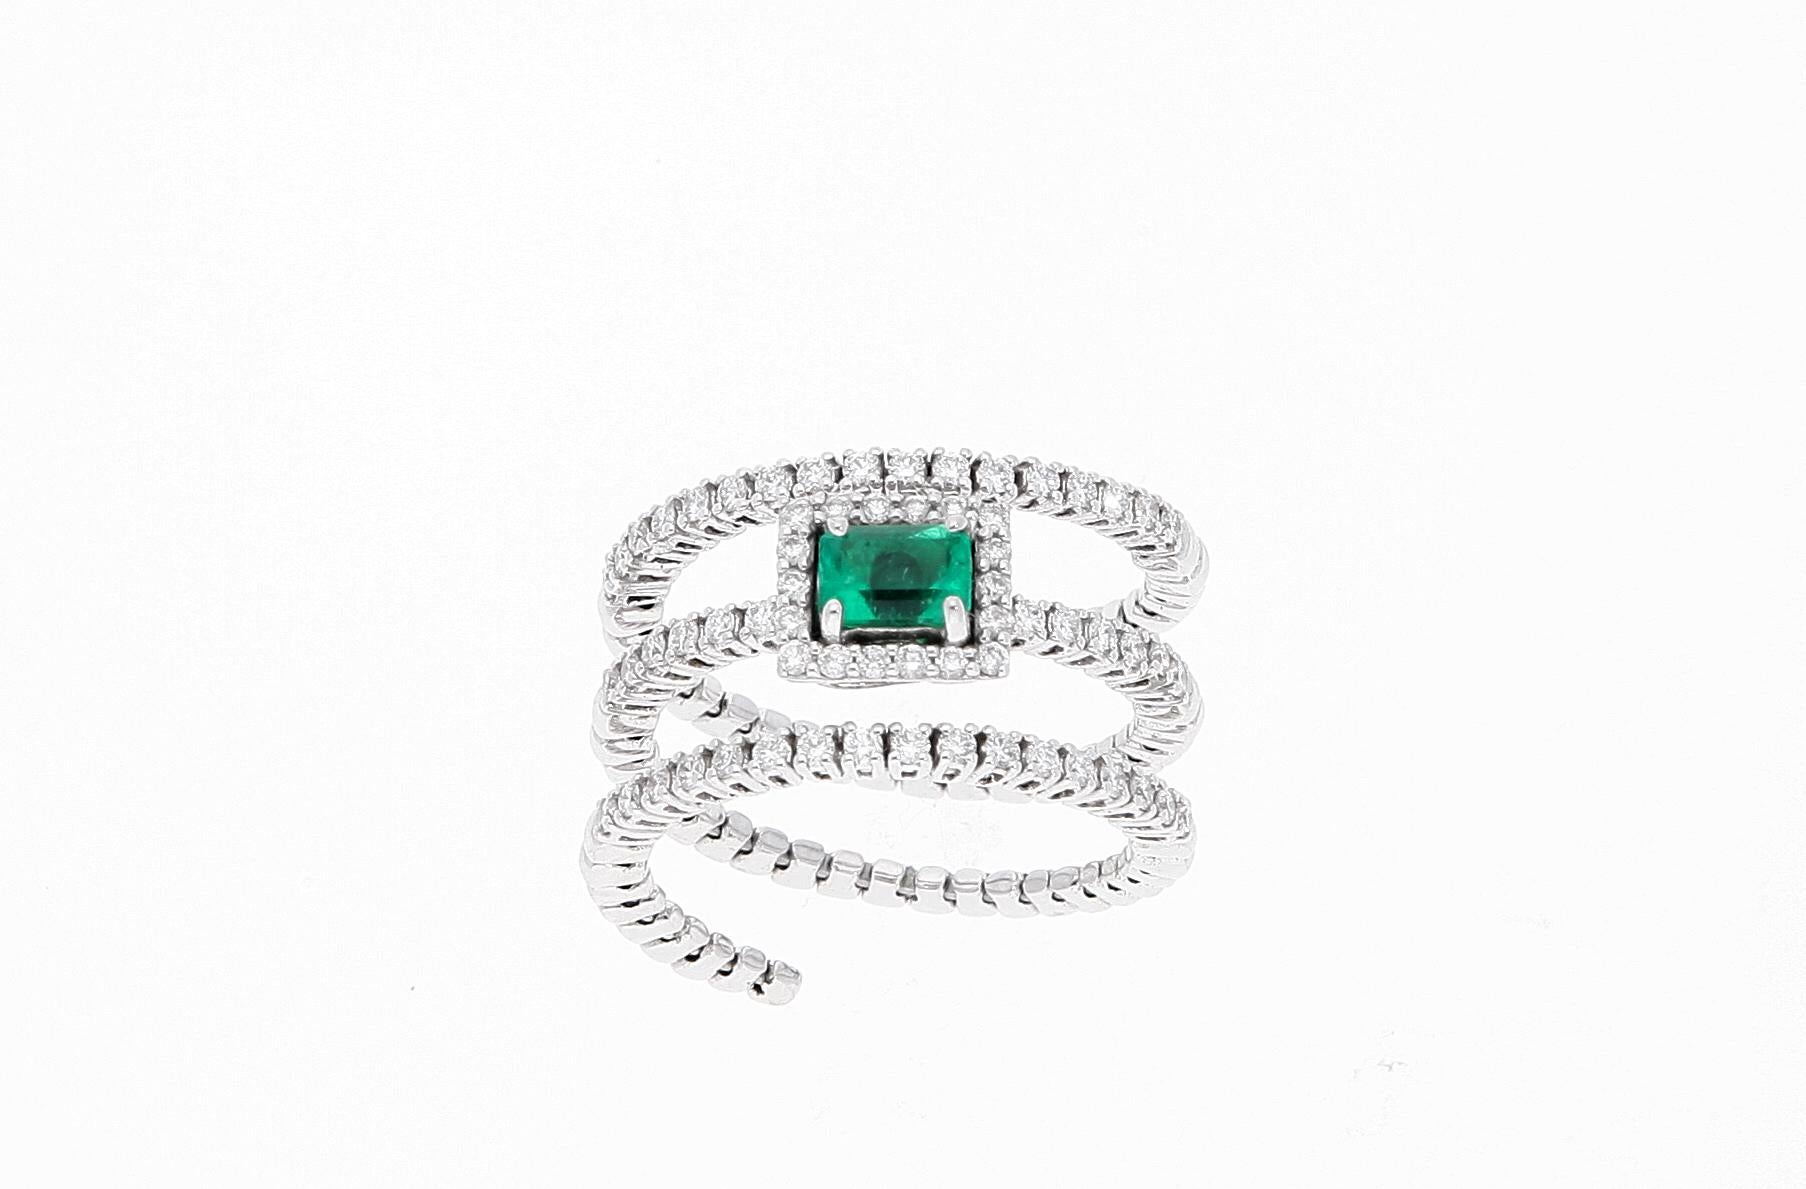 18 karat white gold extendable ring with diamonds lines and one emerald with diamonds around

Total diamonds weight: 0.62 carat
One emerald weight: 0.45 carat
Total weight: 7 grams
Ring size: Size IT 15, USA 7-1/4, FR 54
Approximate size as the ring